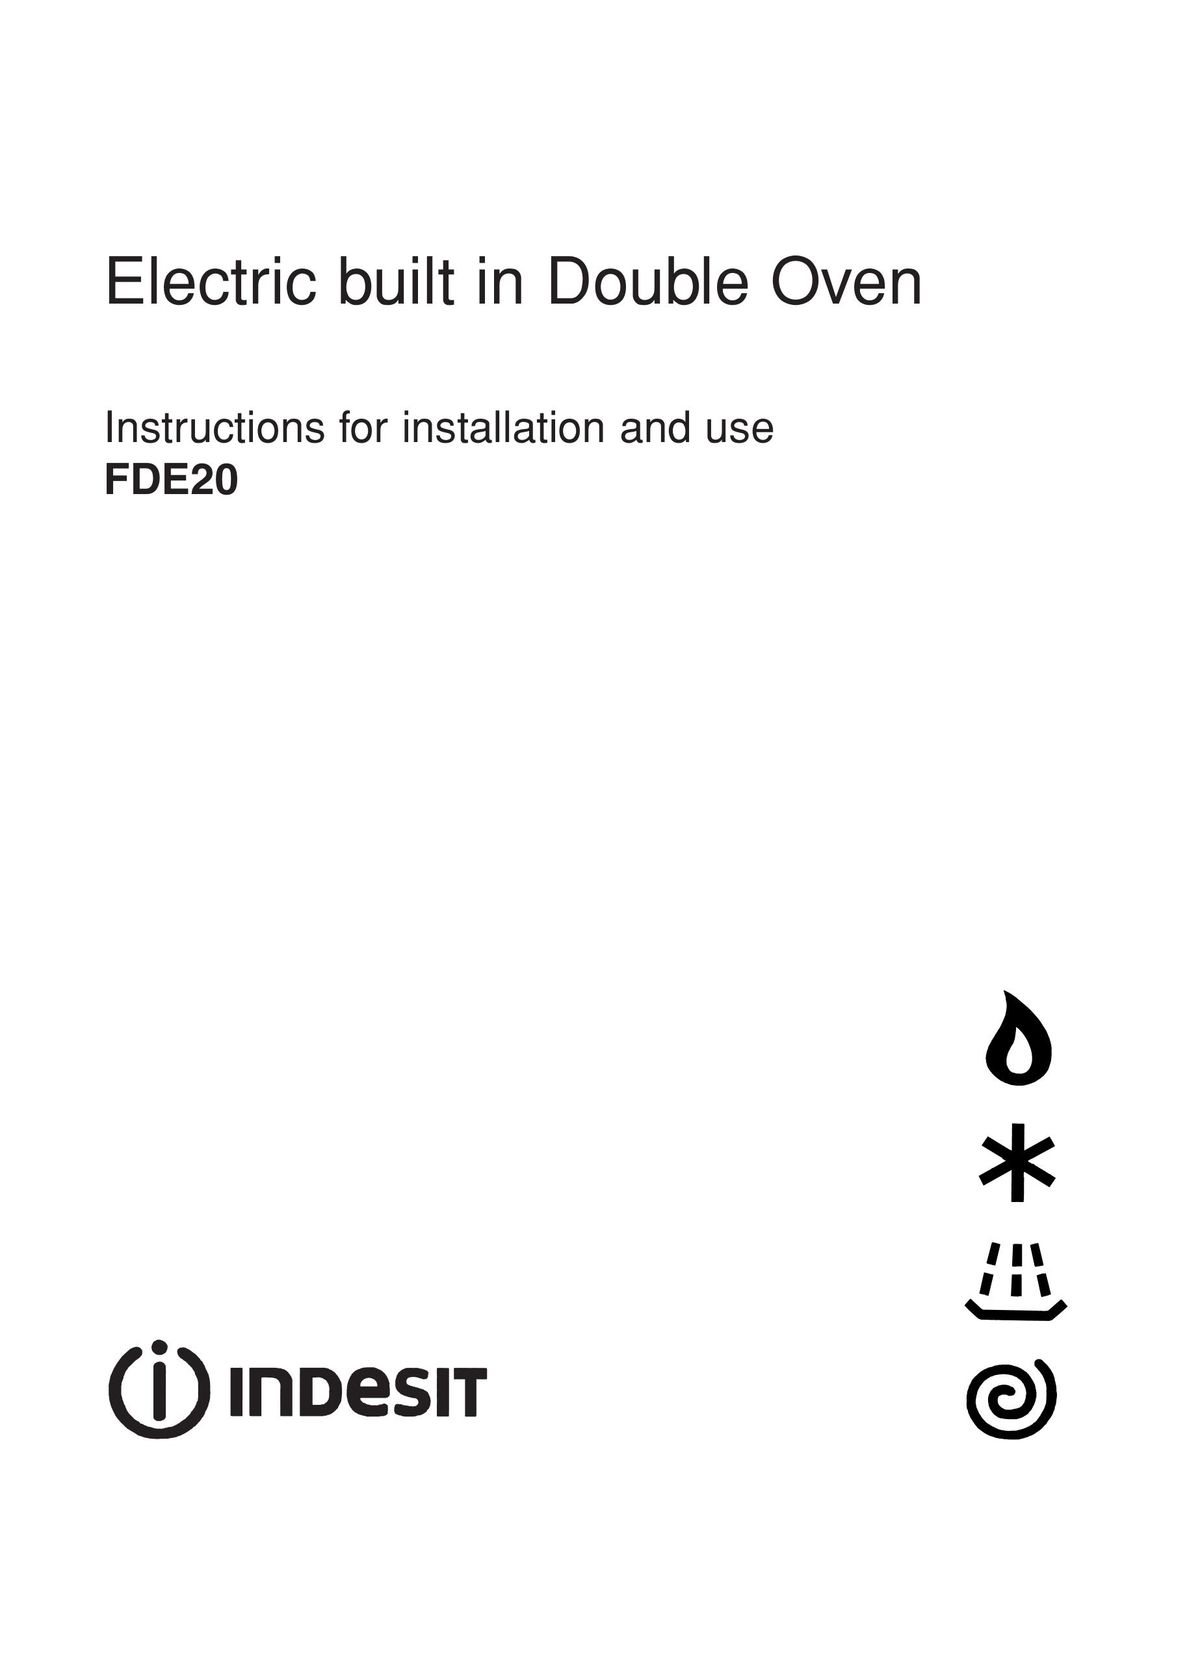 Indesit FDE20 Oven User Manual